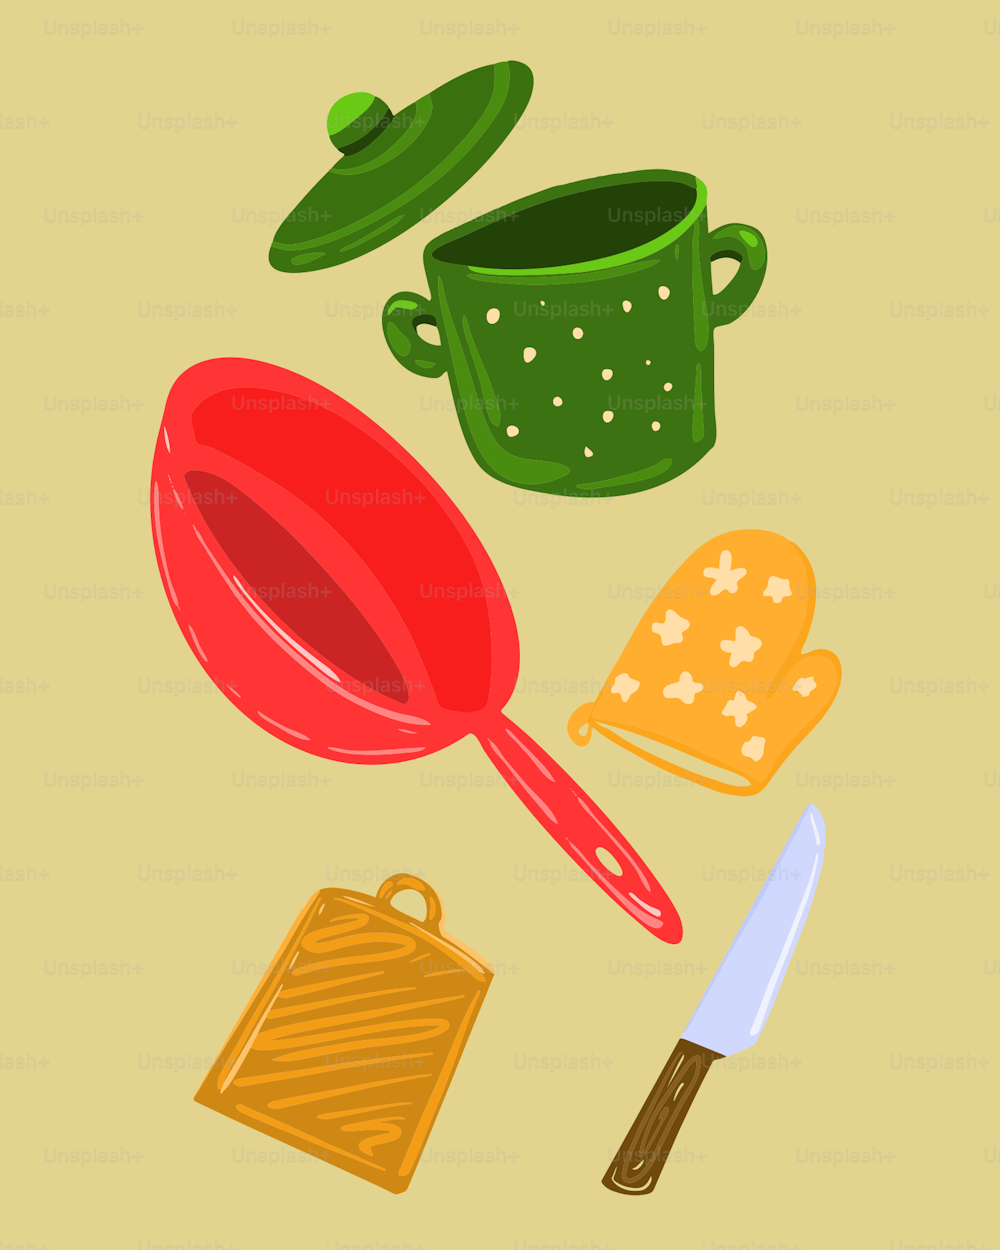 a kitchen utensil with a spatula, spatula, and other kitchen